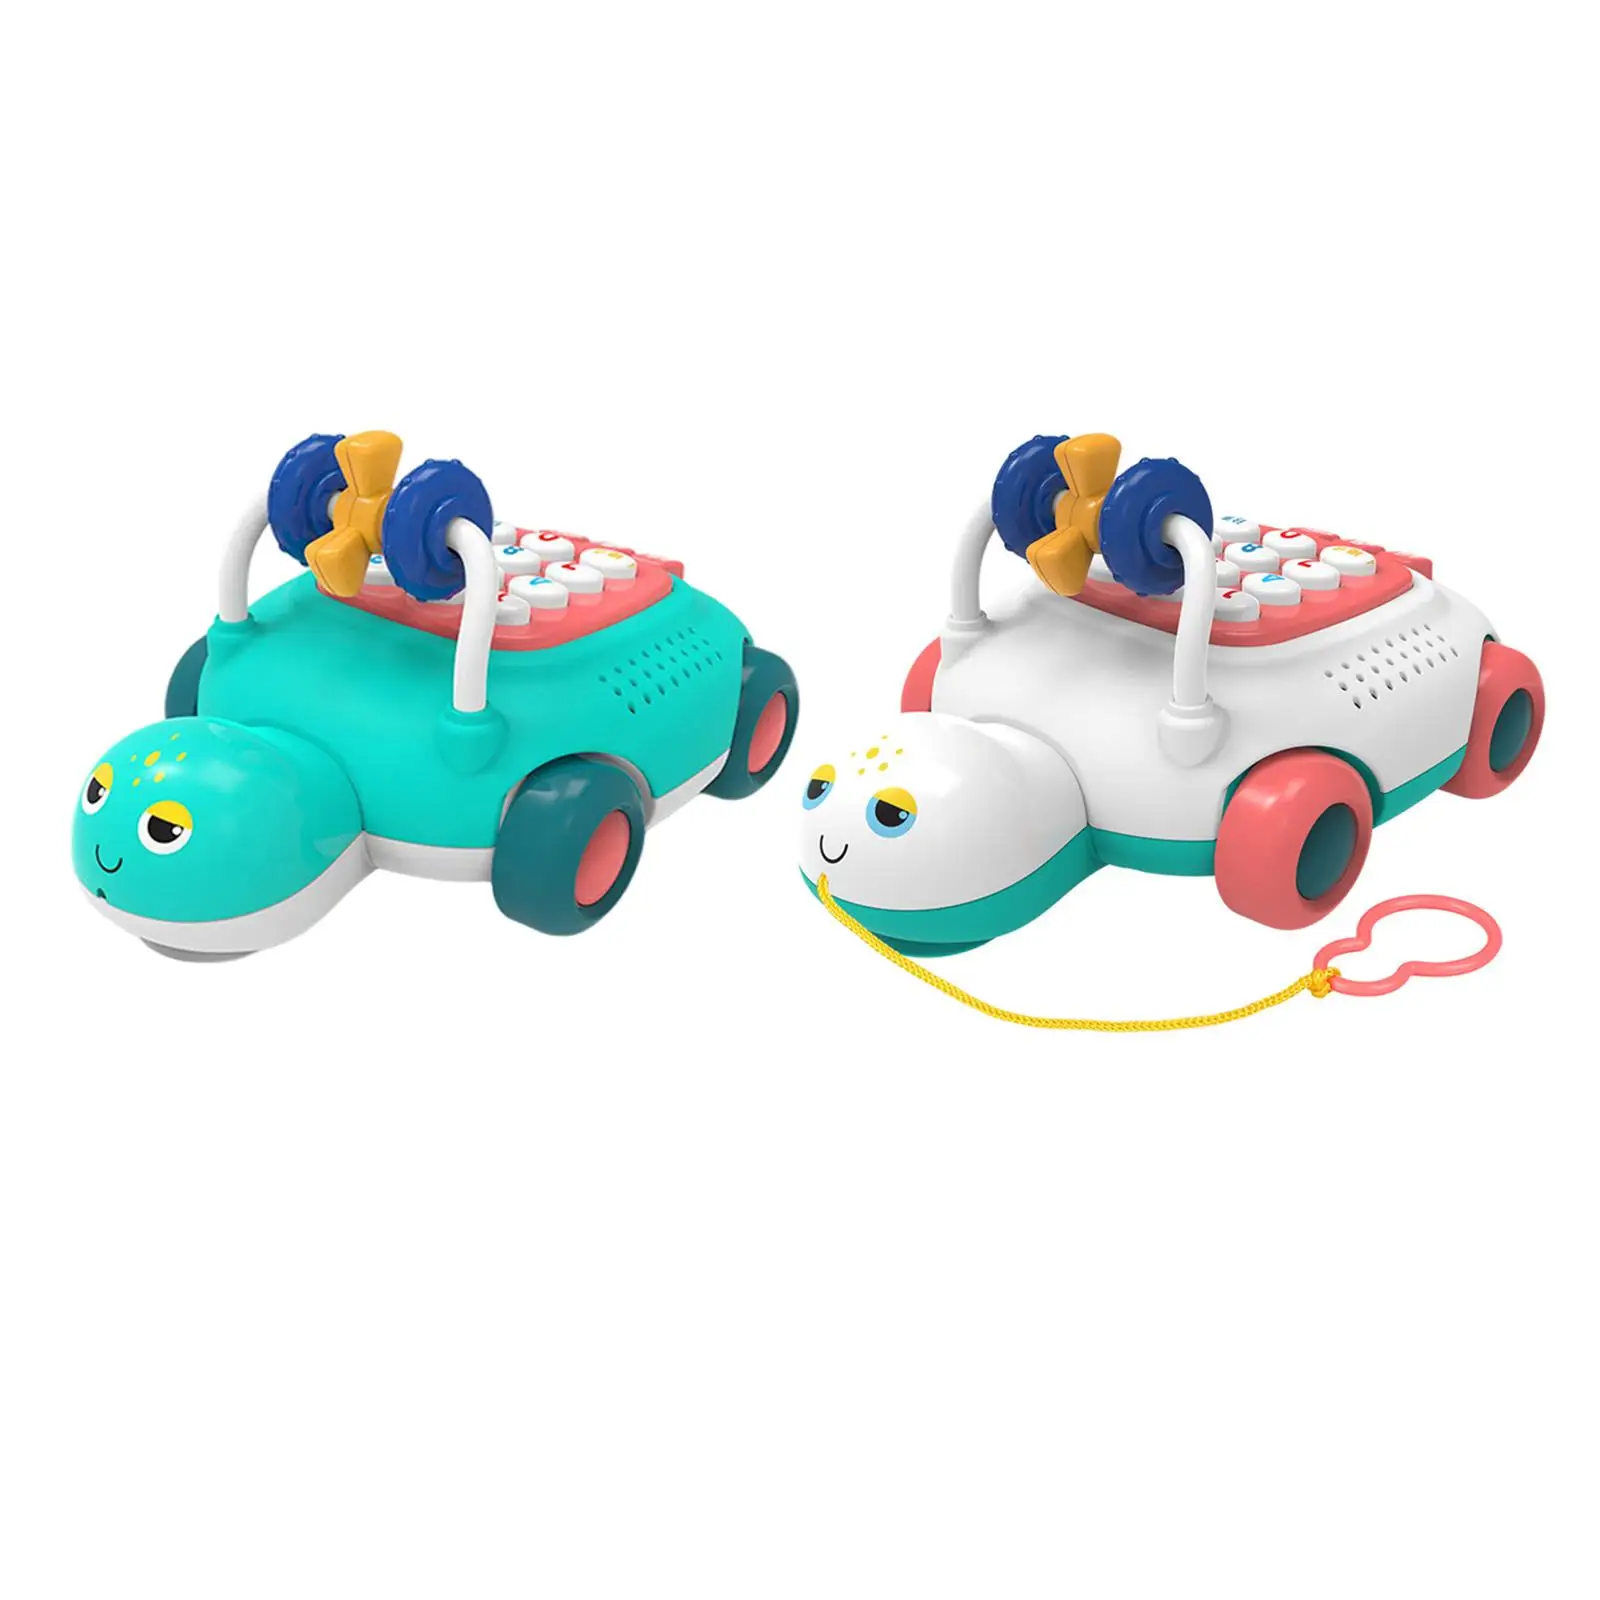 Multifunction Telephone Toys Pull Toys Development Toy Develop Cognition Toys Preschool Learning Phone Toy for Baby Infants Kids